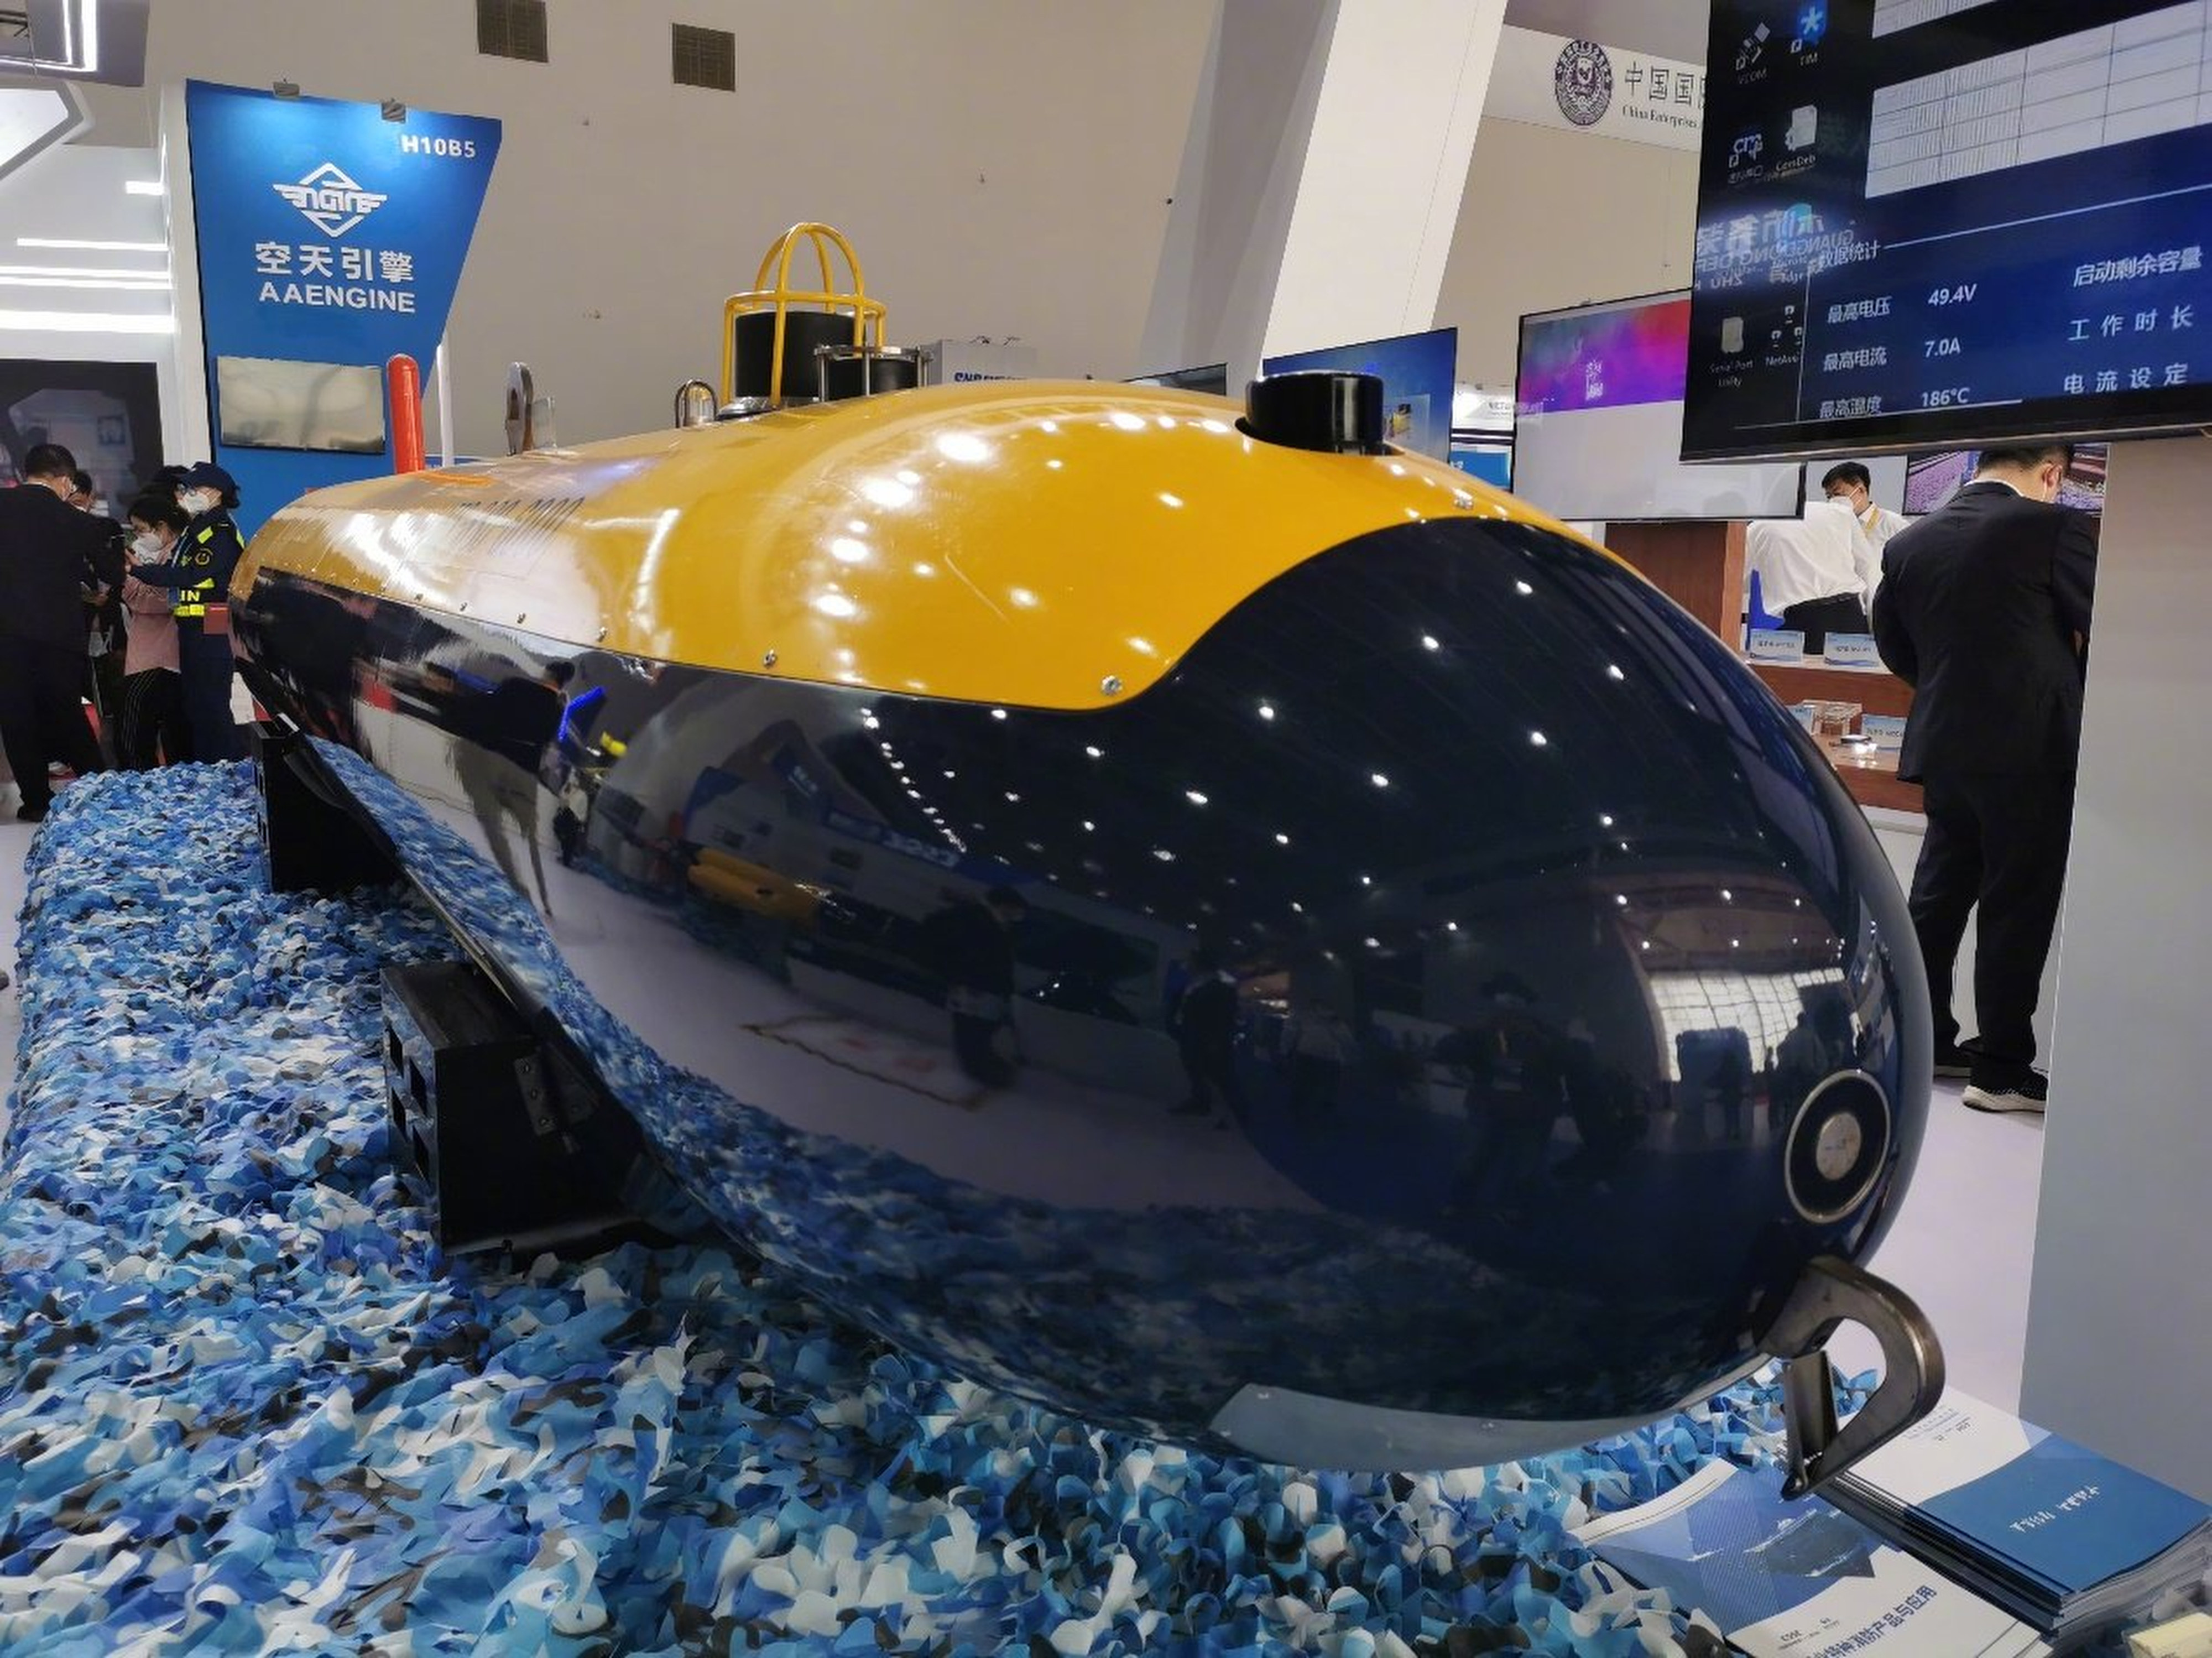 The Haishen 6000 (Poseidon 6000) UUV from the China State Shipbuilding Corporation has a maximum working depth of 6,000 metres and can reach speeds of up to 4 knots. Photo: Weibo